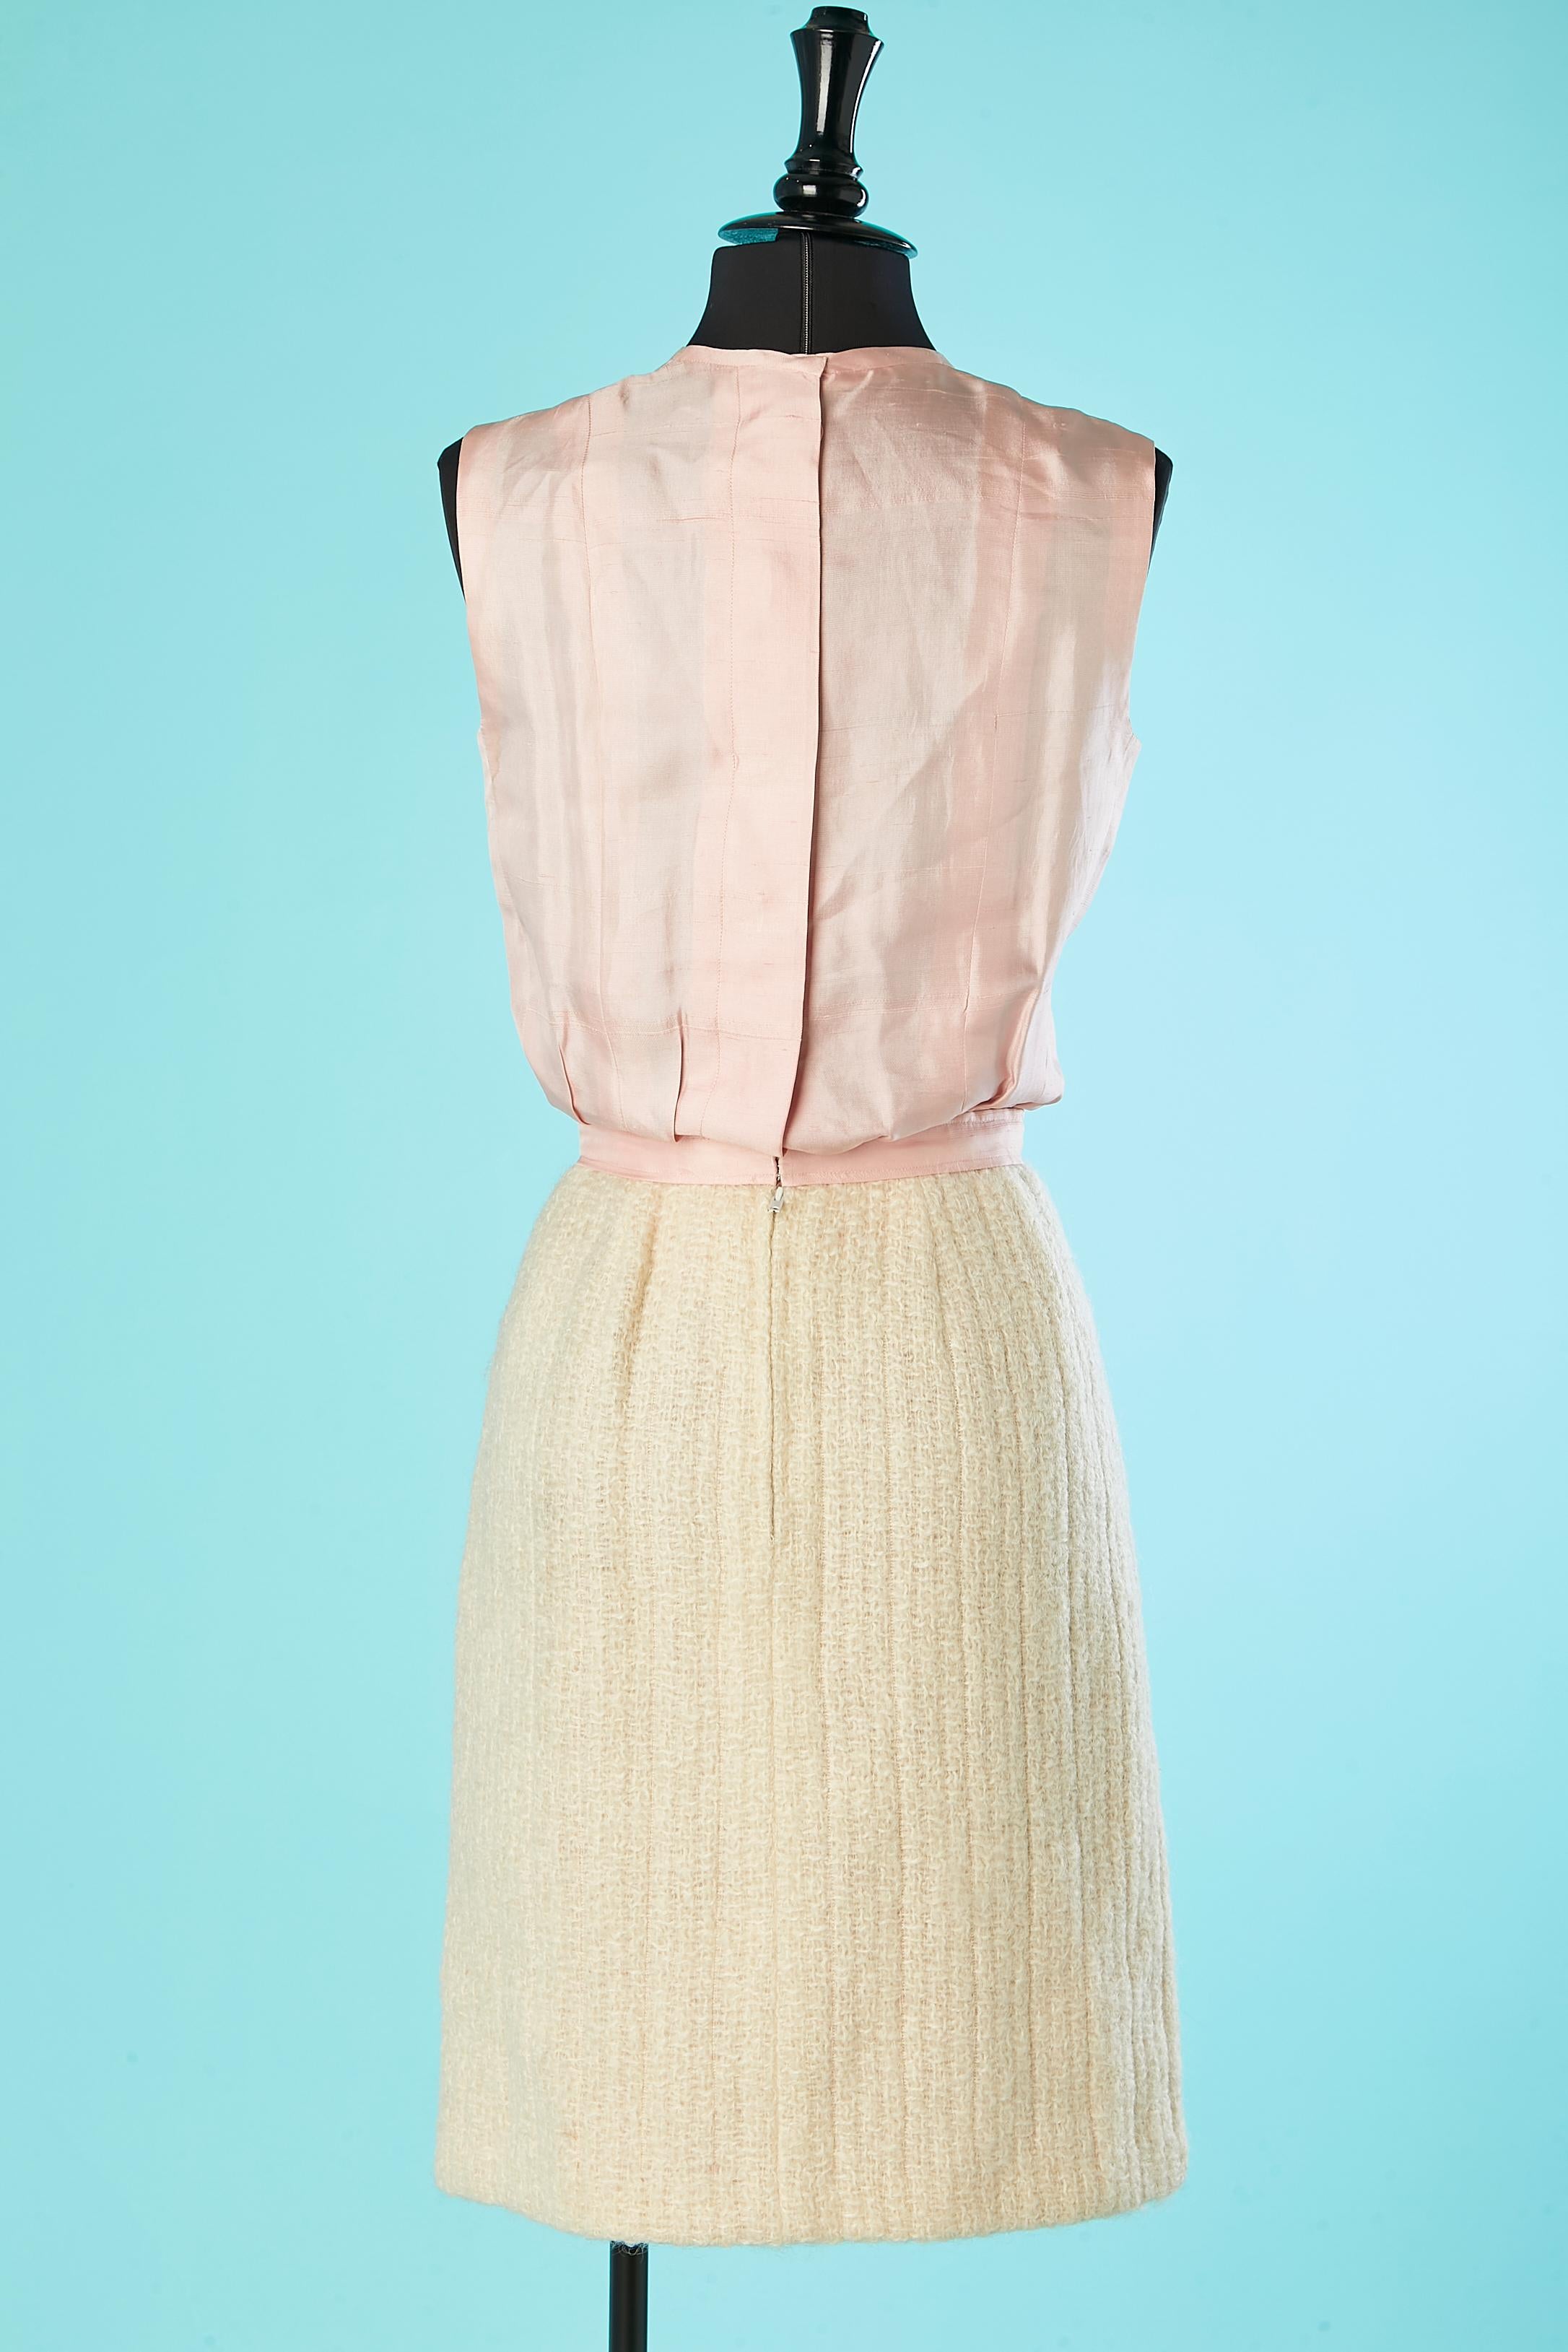 Off-white tweed and pale silk jacket and dress ensemble Chanel 1964  10